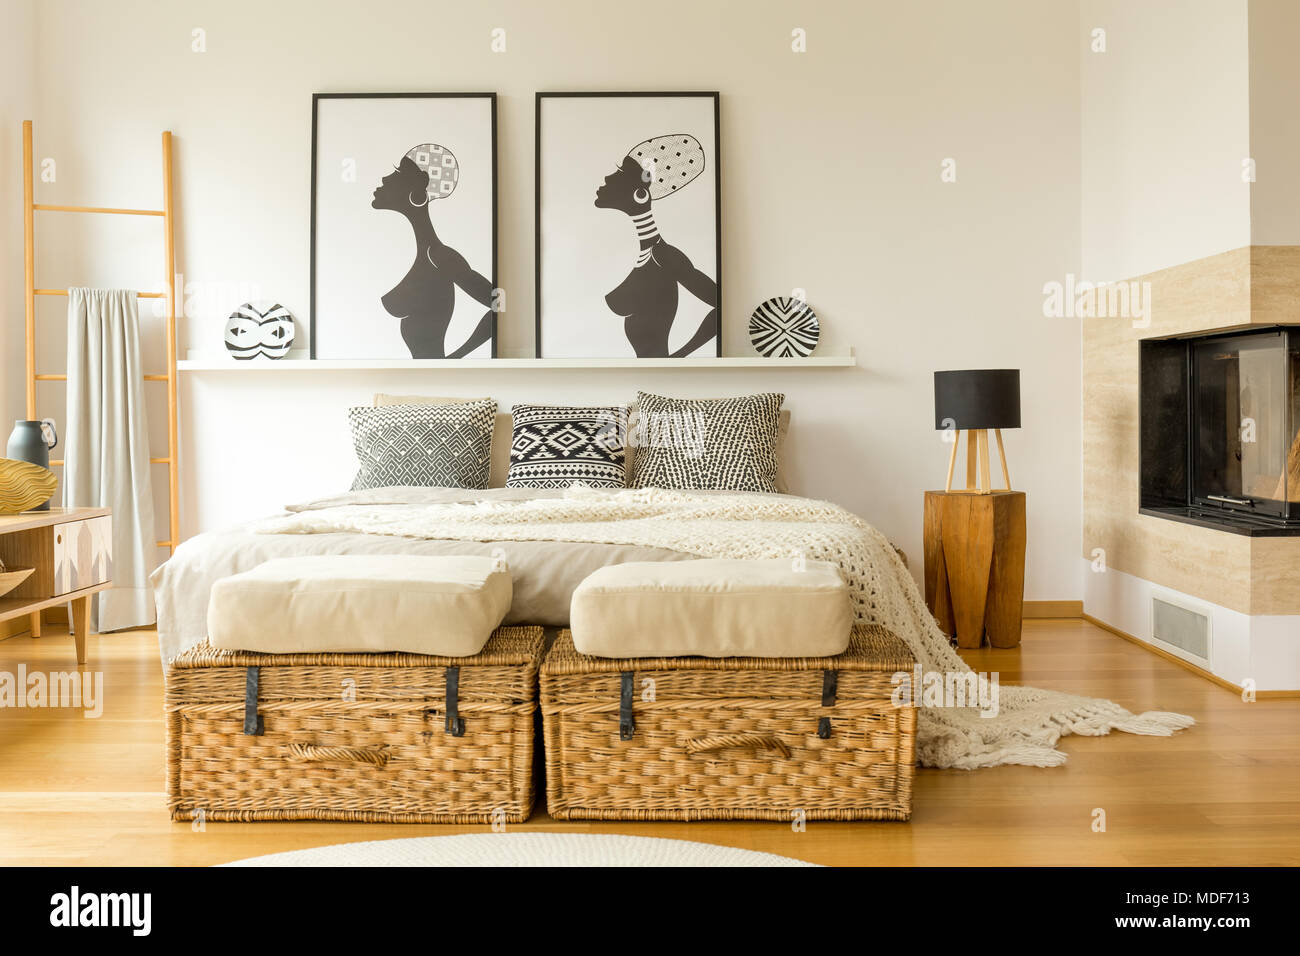 African posters, wicker boxes, fireplace and double bed with patterned pillows in a boho bedroom interior Stock Photo